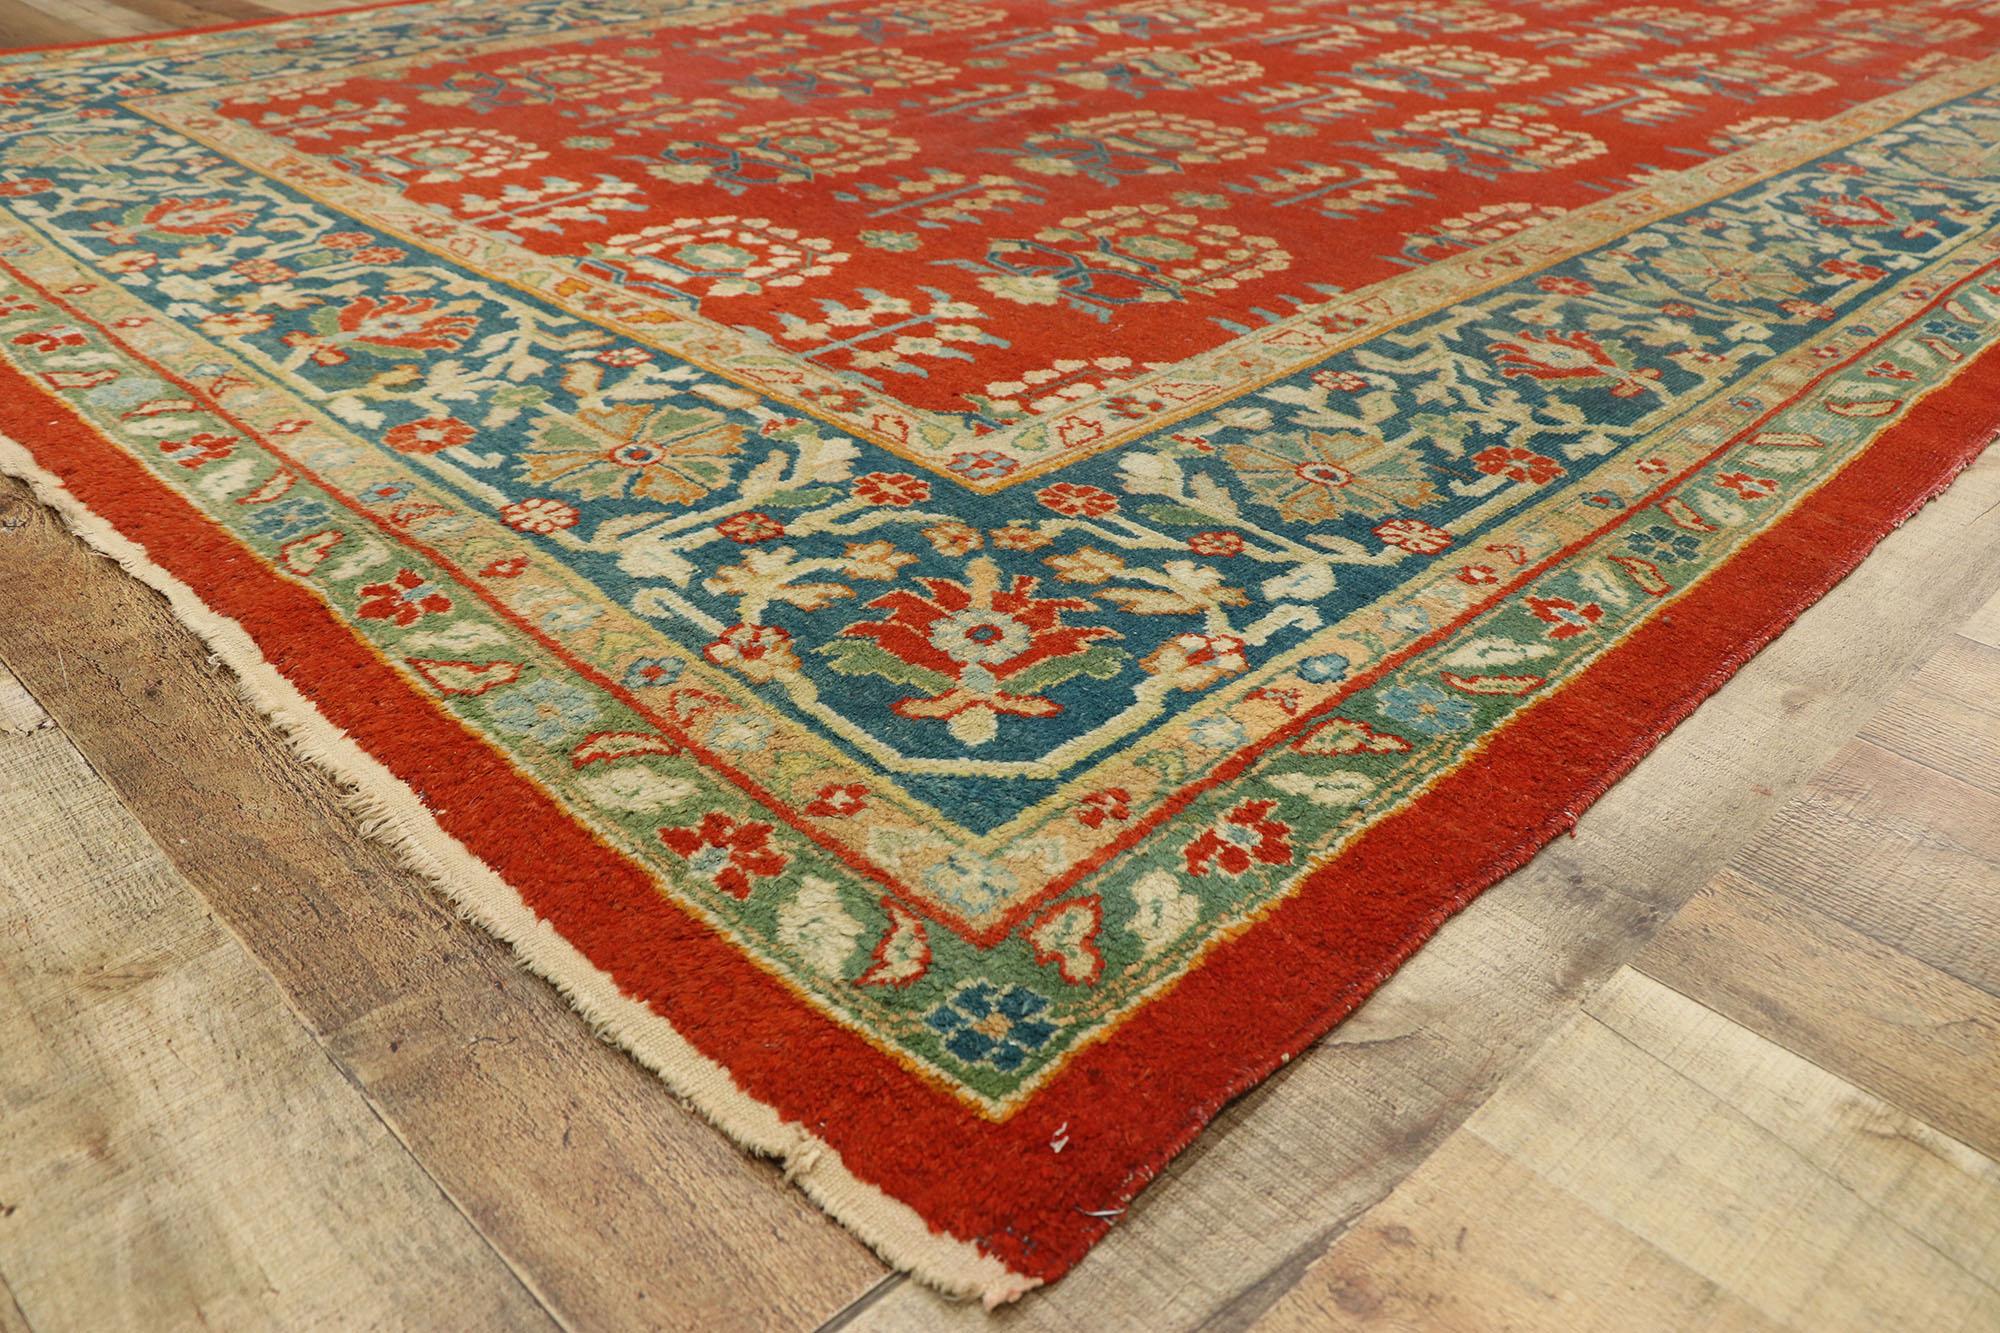 Wool Antique Red Indian Agra Rug 